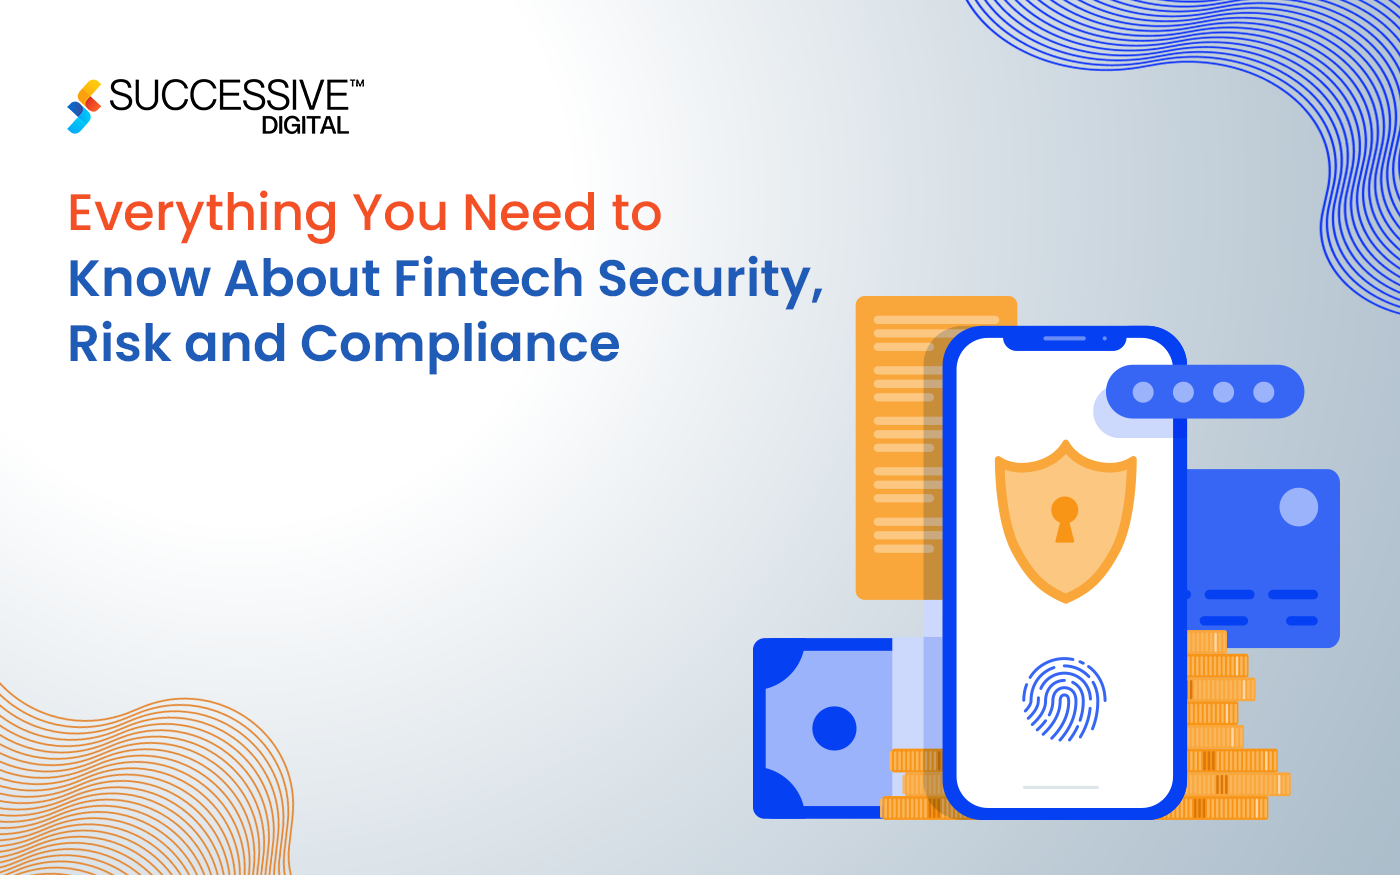 Everything You Need to Know About Fintech Security, Risk and Compliance